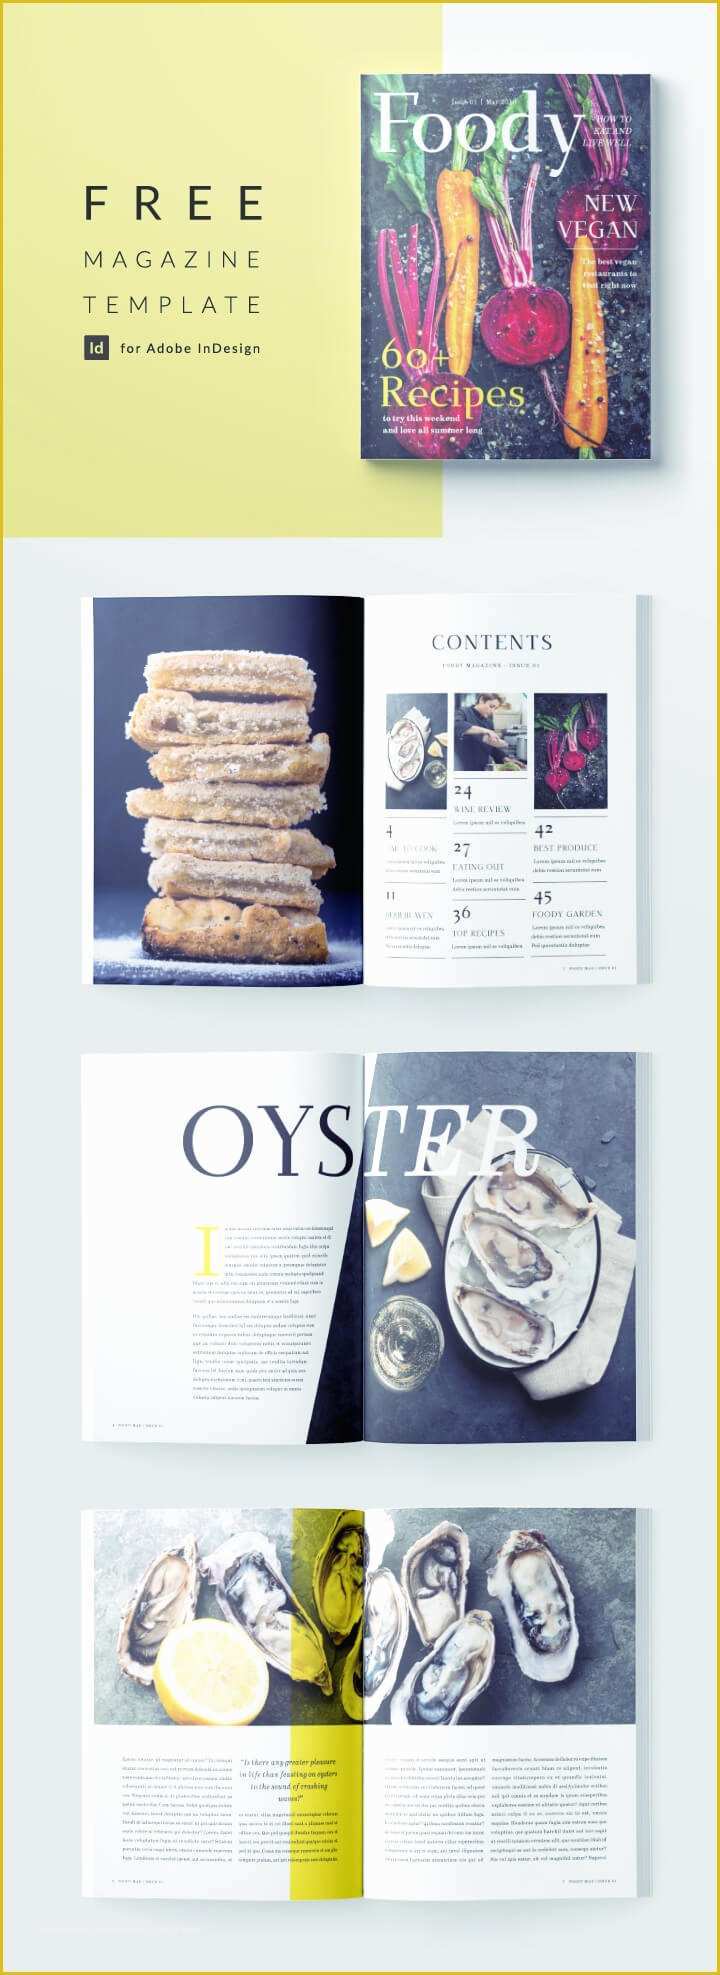 Free Online Magazine Template Of Stylish Food Magazine Template for Indesign